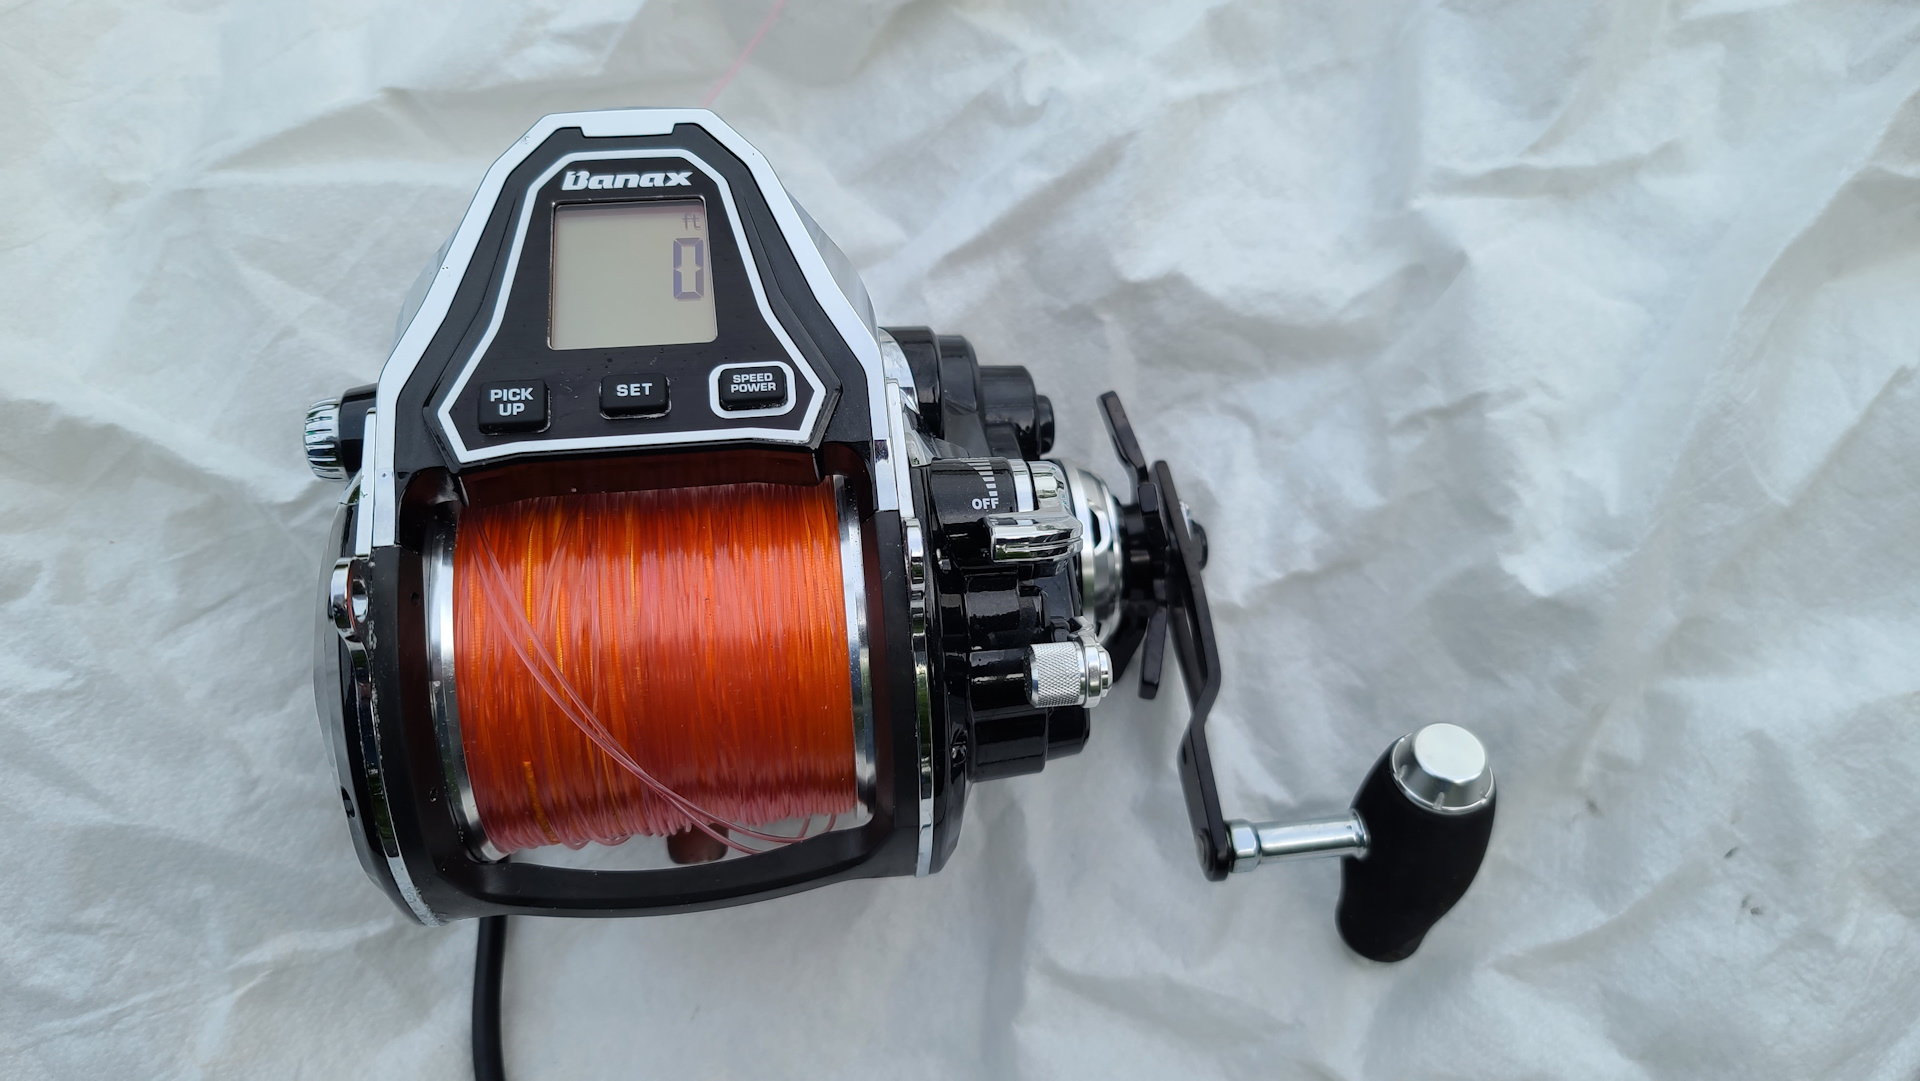 Used Penn reels for sale - The Hull Truth - Boating and Fishing Forum